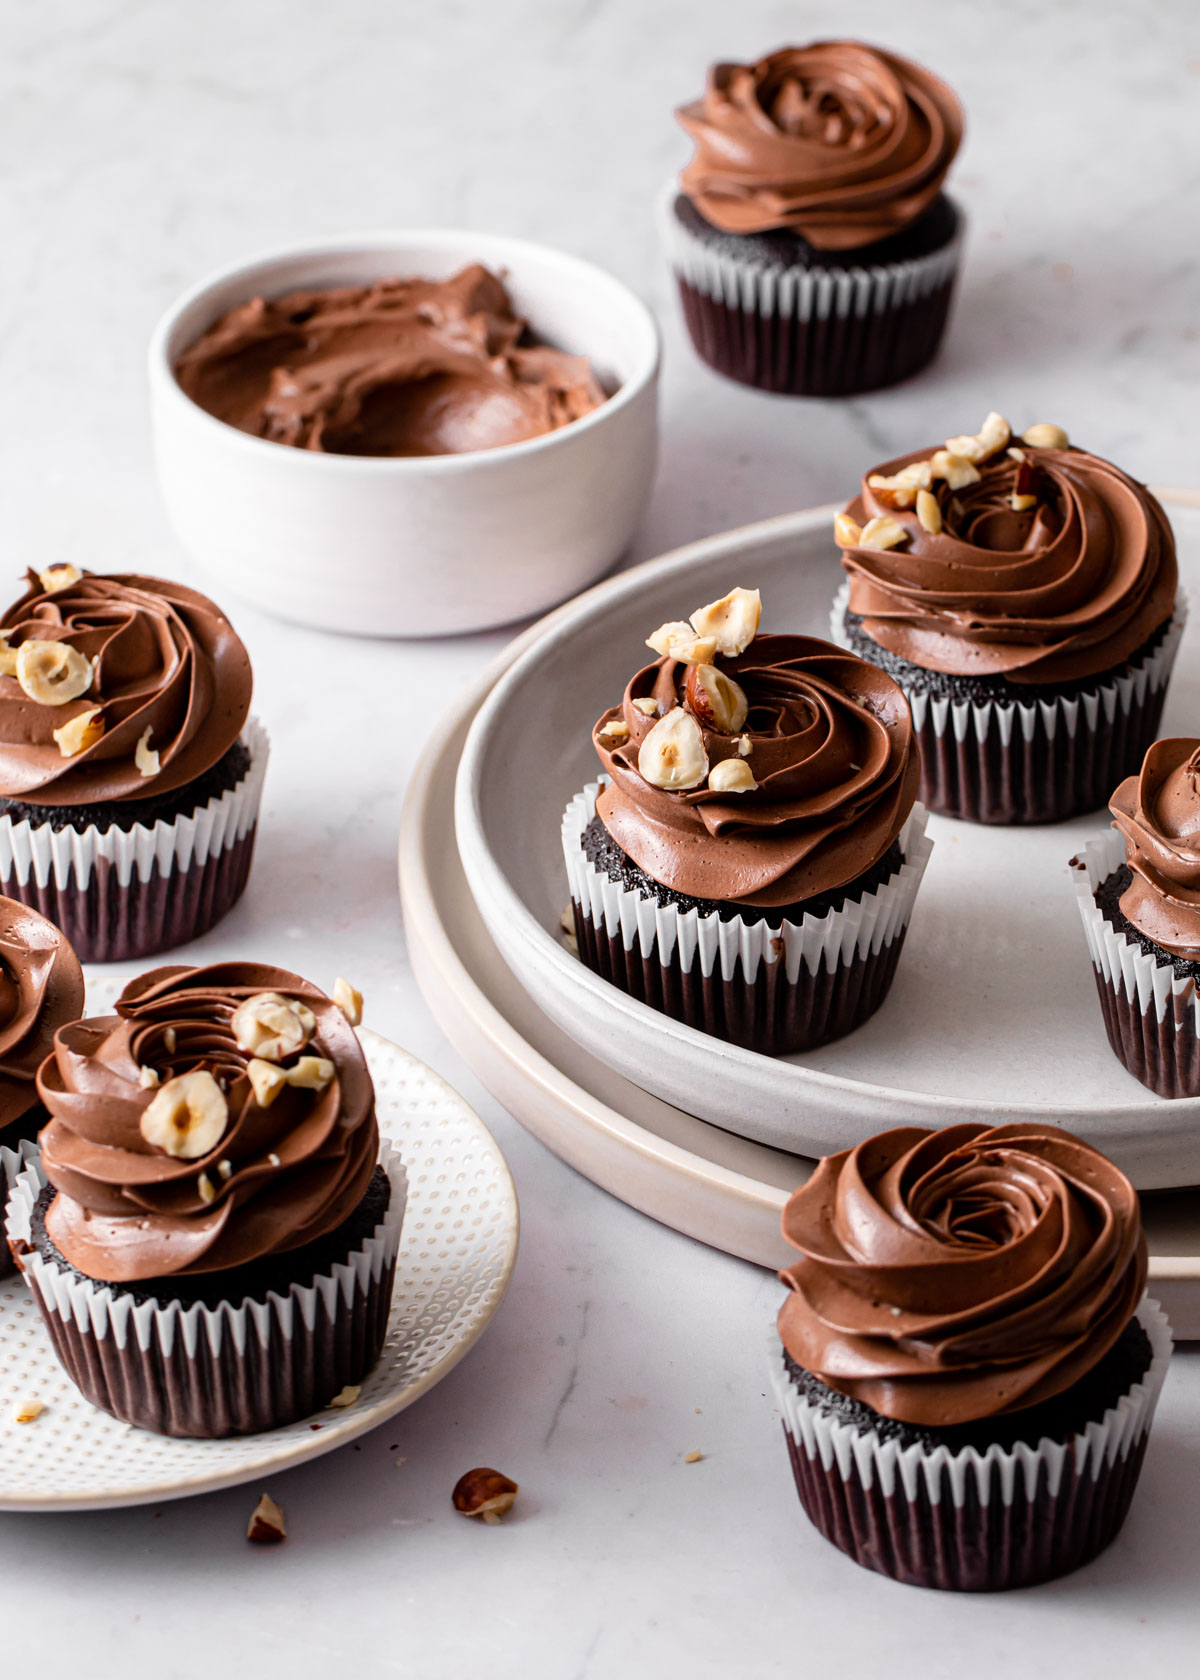 Platters of Chocolate Nutella Cupcakes with hazelnuts on top